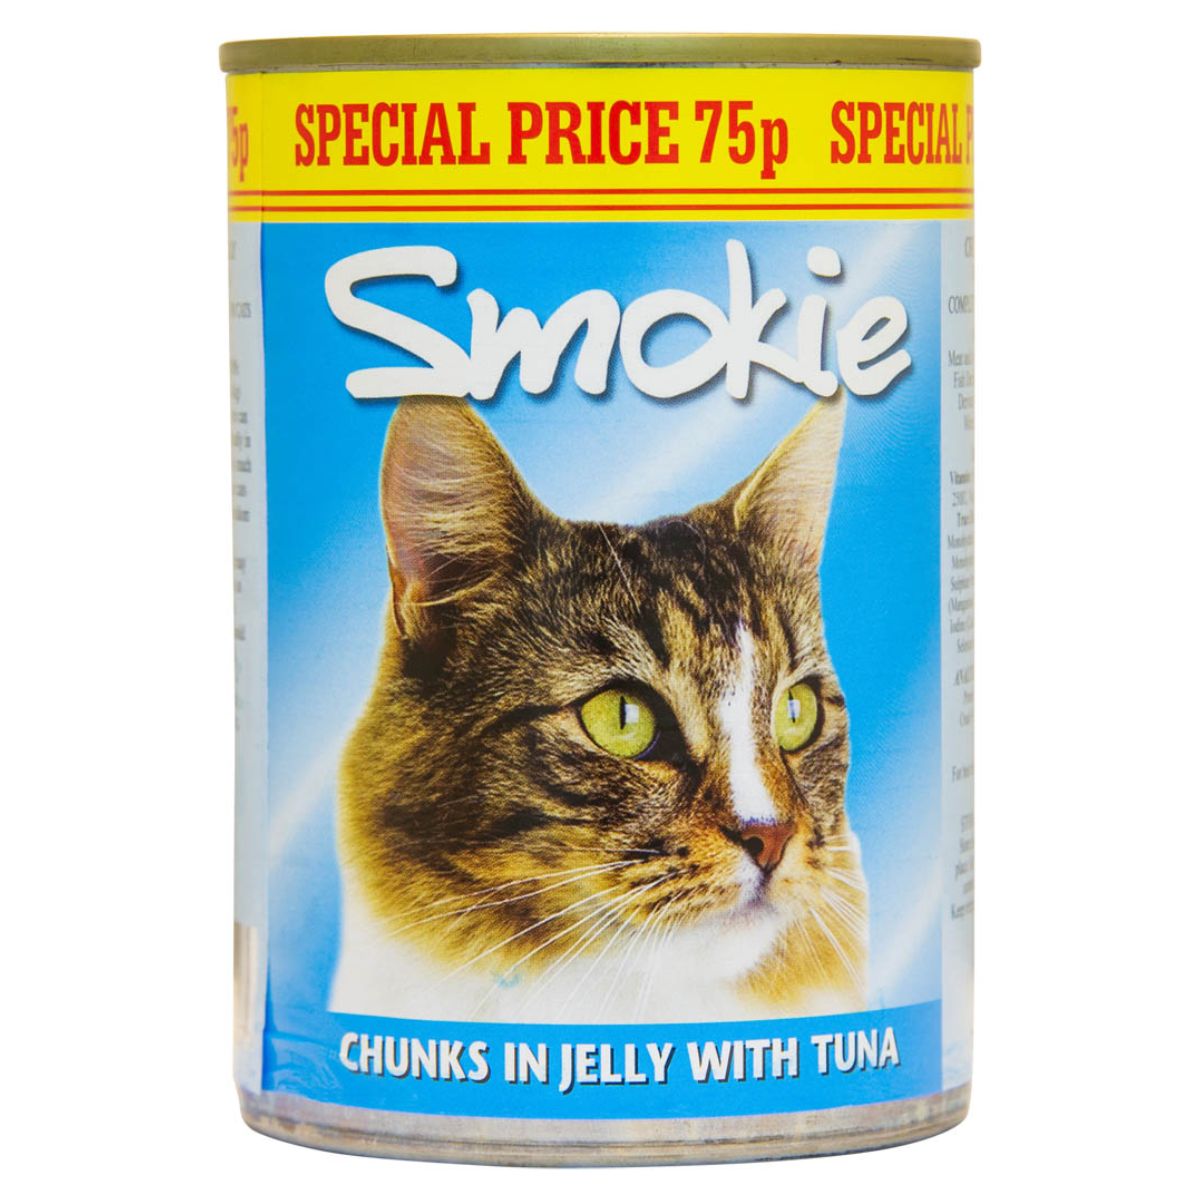 A can of Smokie - Chunks in Jelly with Tuna - 400g canned cat food.